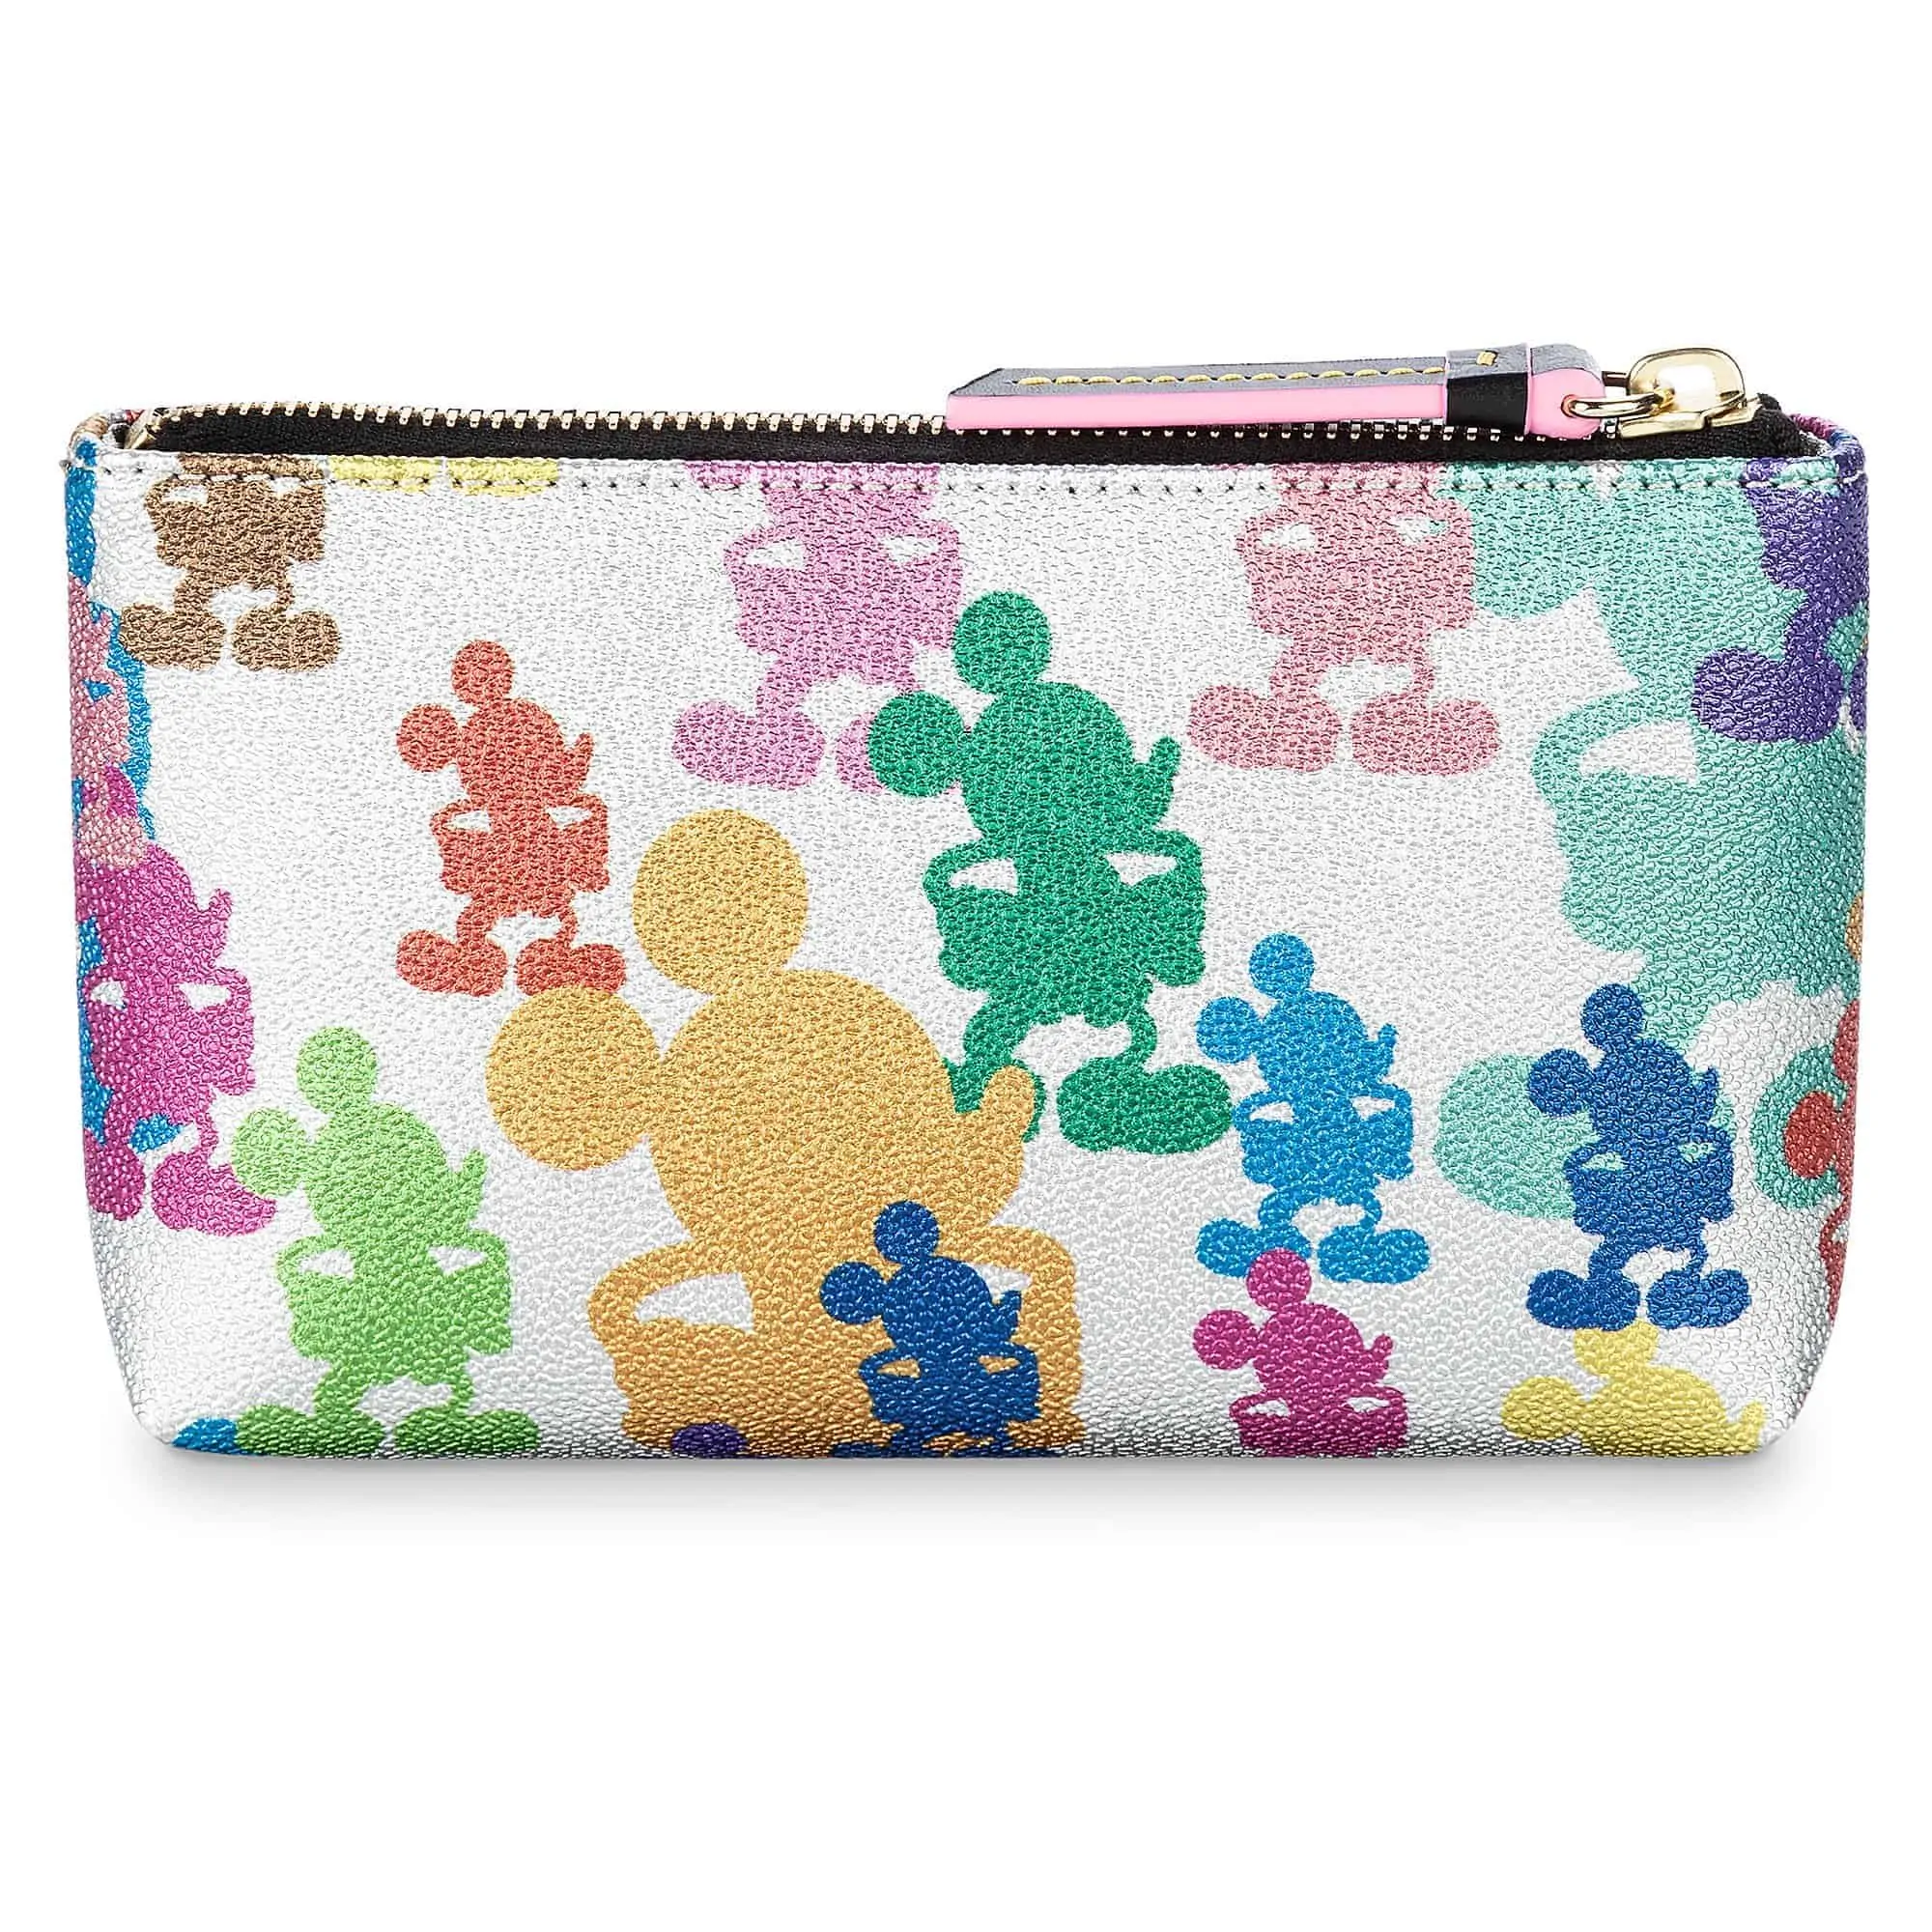 Mickey Mouse Silver Cosmetic Bag(bag) by Dooney & Bourke – 10th Anniversary